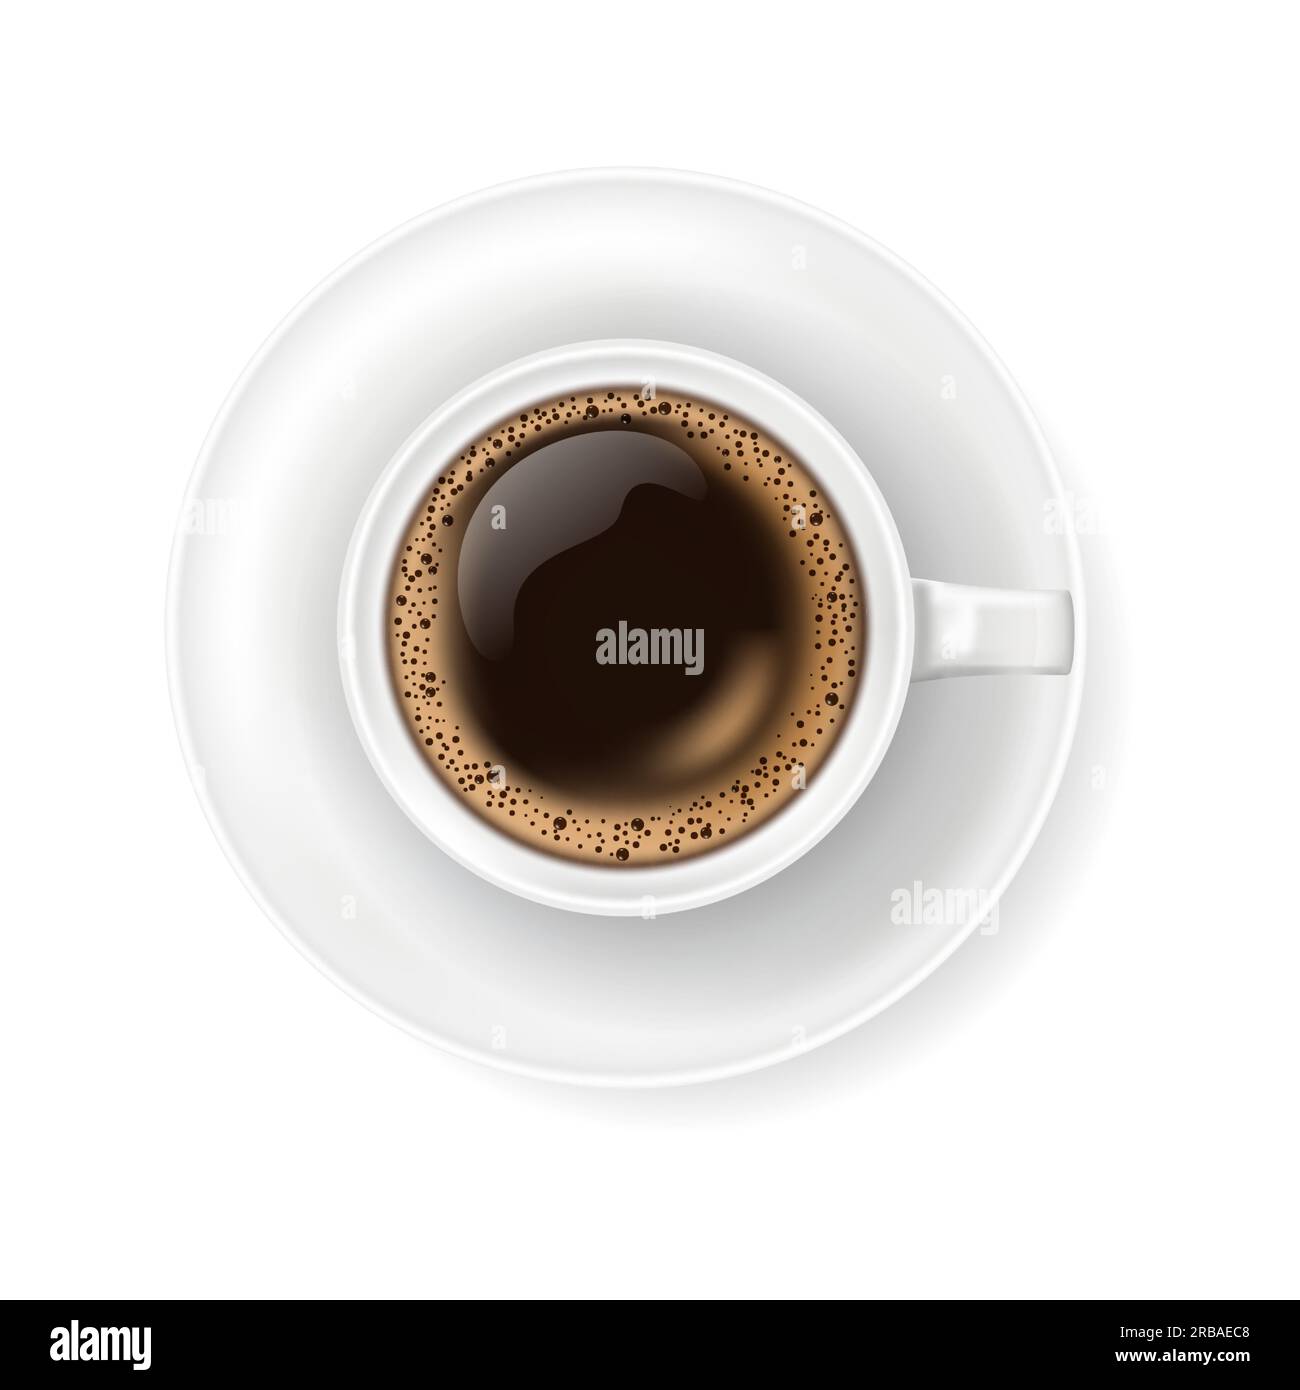 https://c8.alamy.com/comp/2RBAEC8/top-view-at-white-coffee-cup-on-plate-realistic-vector-illustration-of-hot-coffee-drink-mug-espresso-or-americano-3d-caffeine-beverage-element-for-2RBAEC8.jpg